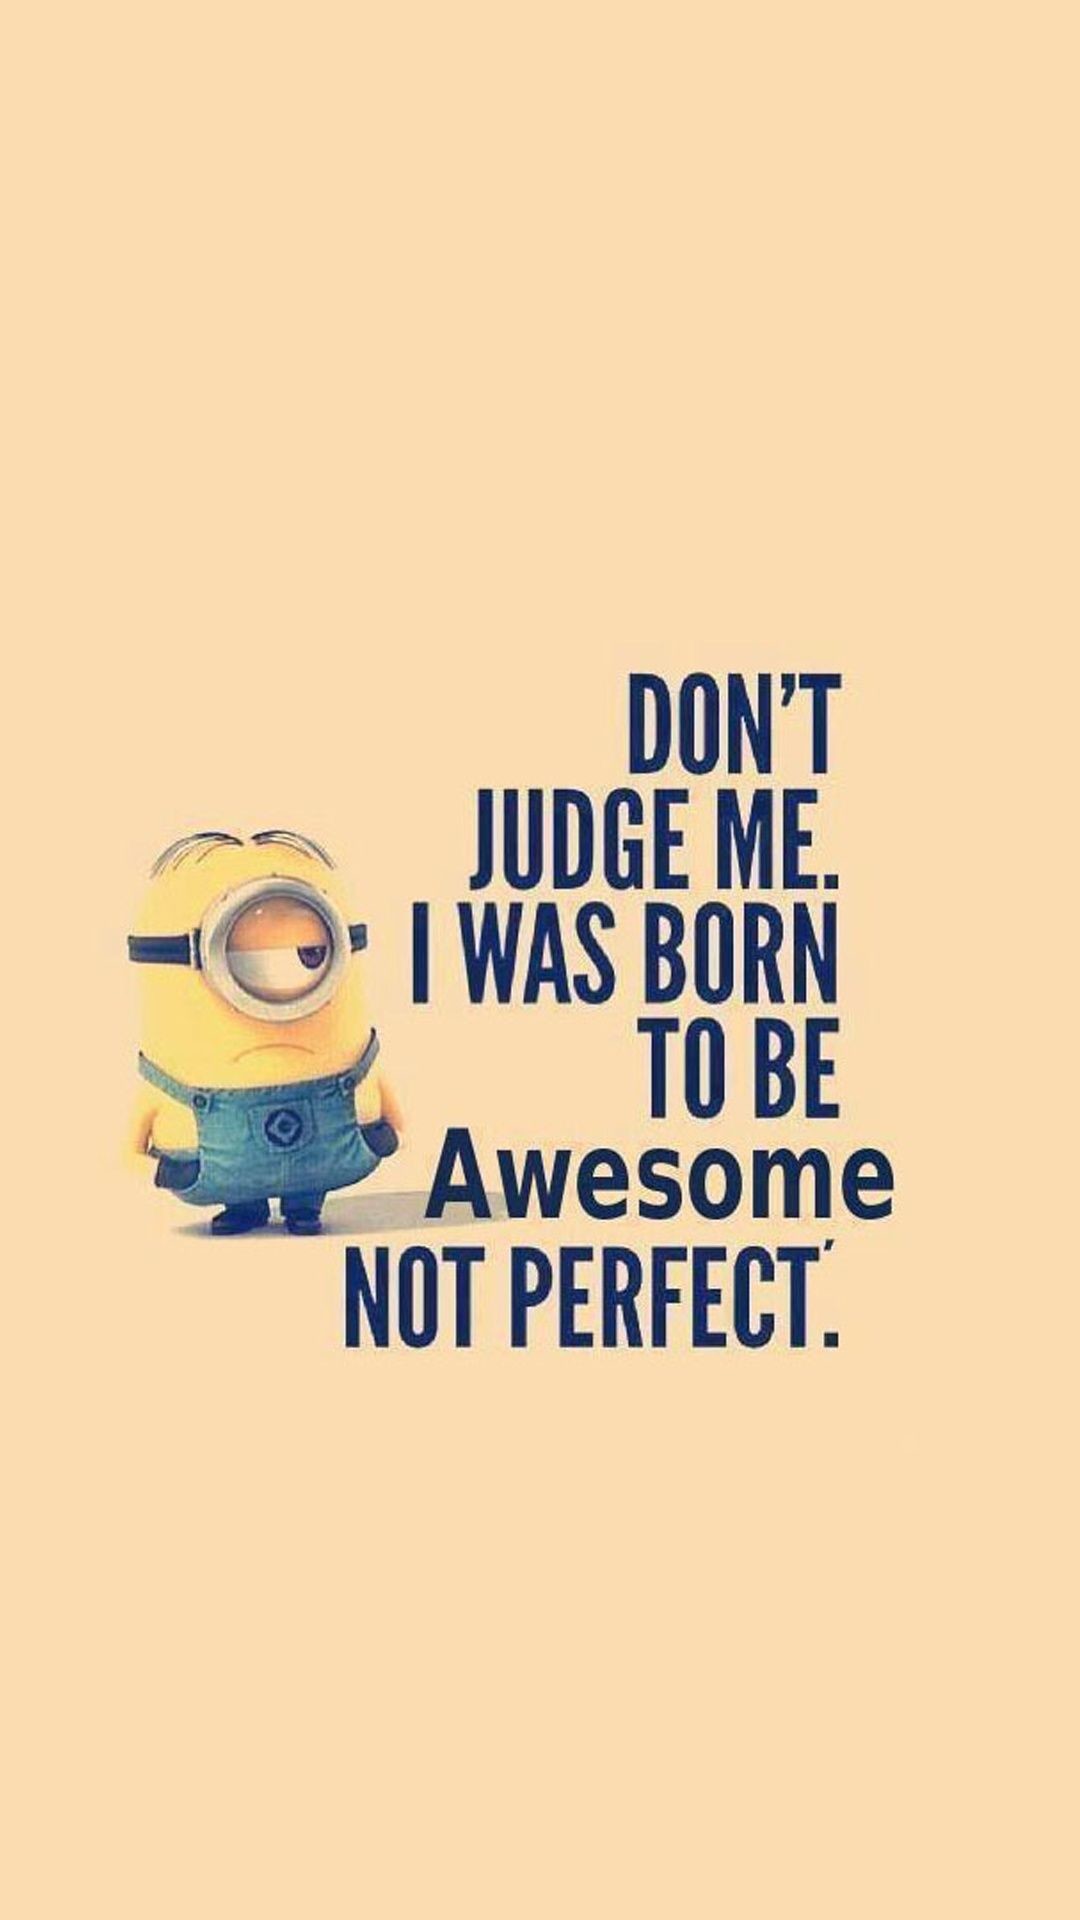 1080x1920 Tap image for more iPhone quotes wallpaper! don't judge me. minion -  @mobile9 | Wallpapers for iPhone 5/5s, iPhone 6 & iPhone 6 plus #background  #saying